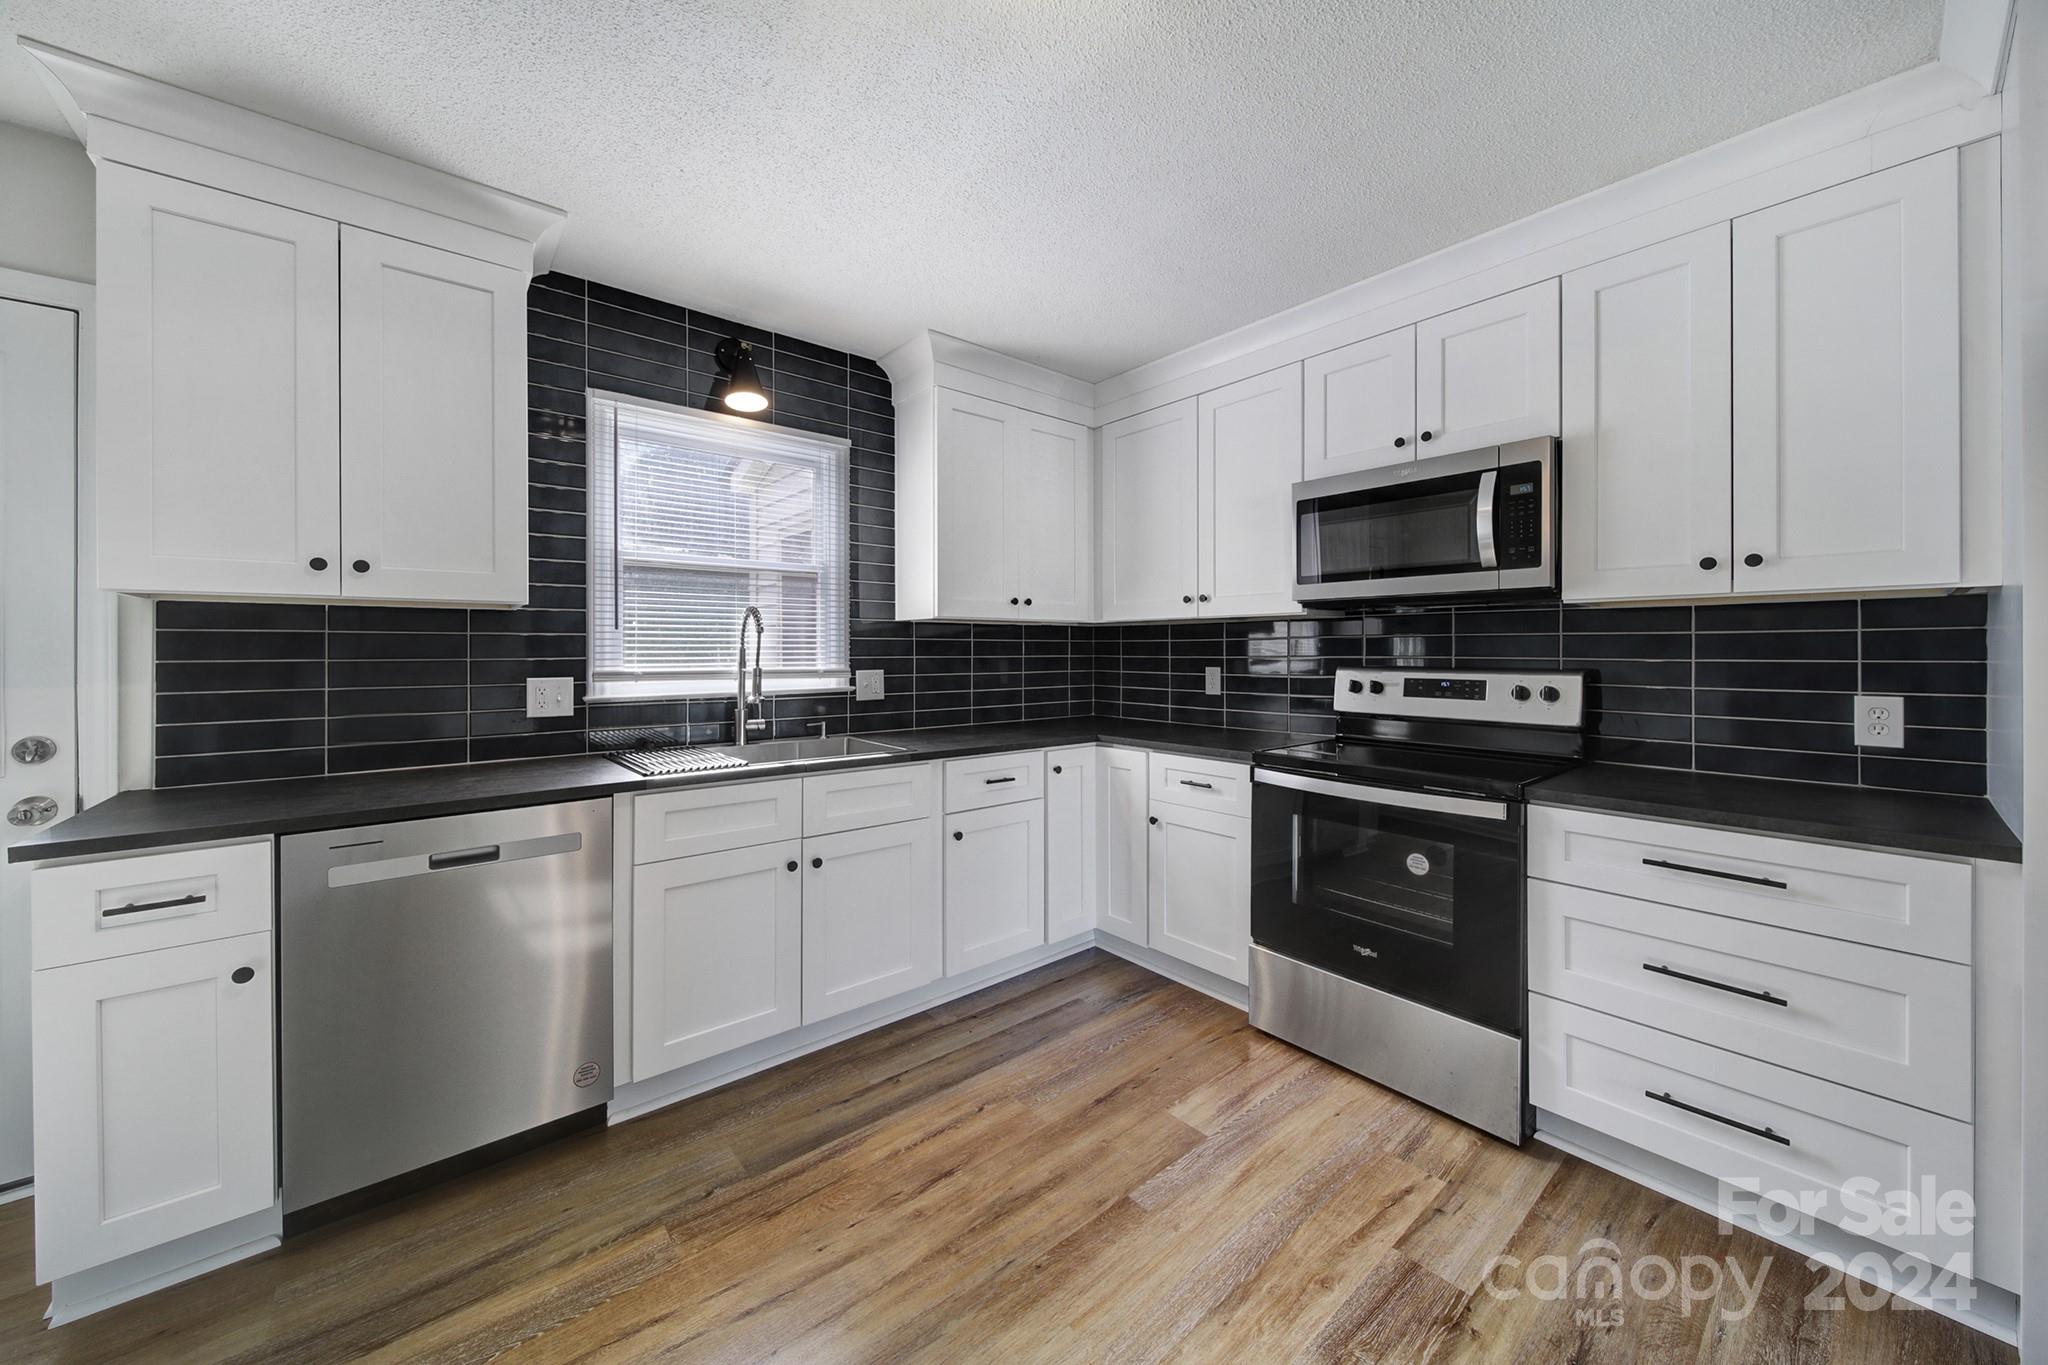 a kitchen with granite countertop wooden cabinets and black stainless steel appliances